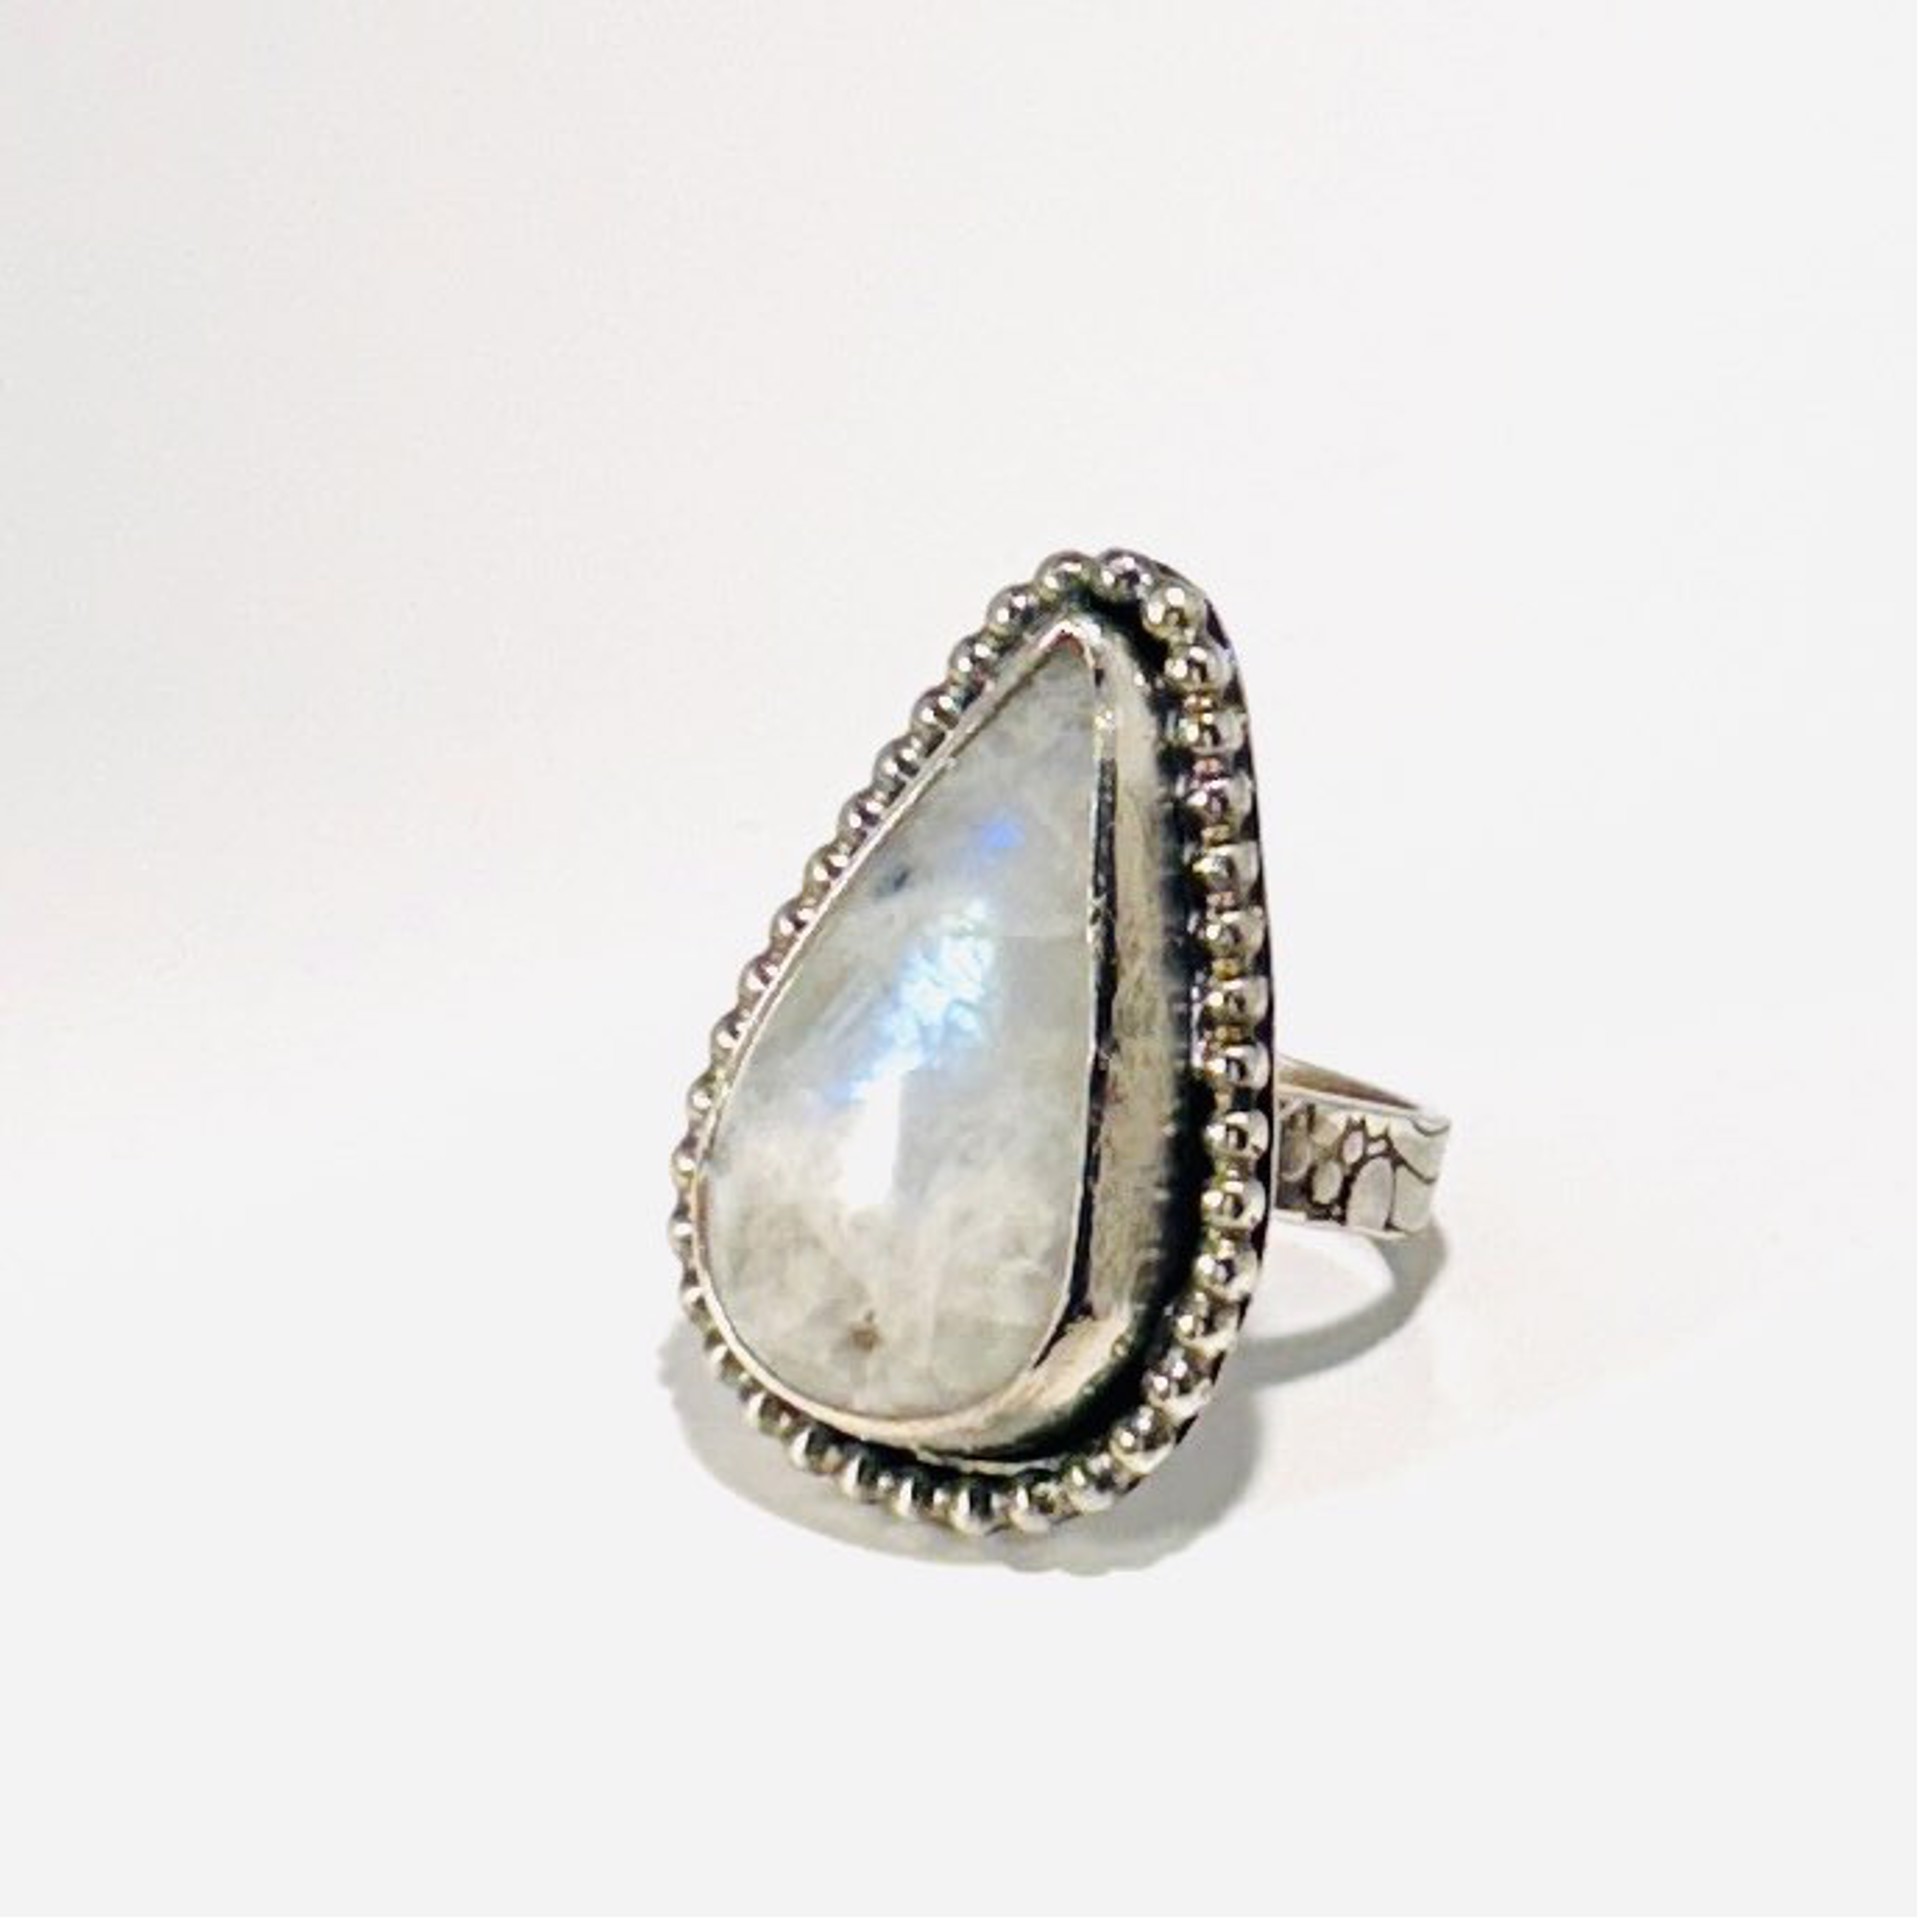 Moonstone Teardrop Ring sz7 AB23-66 by Anne Bivens